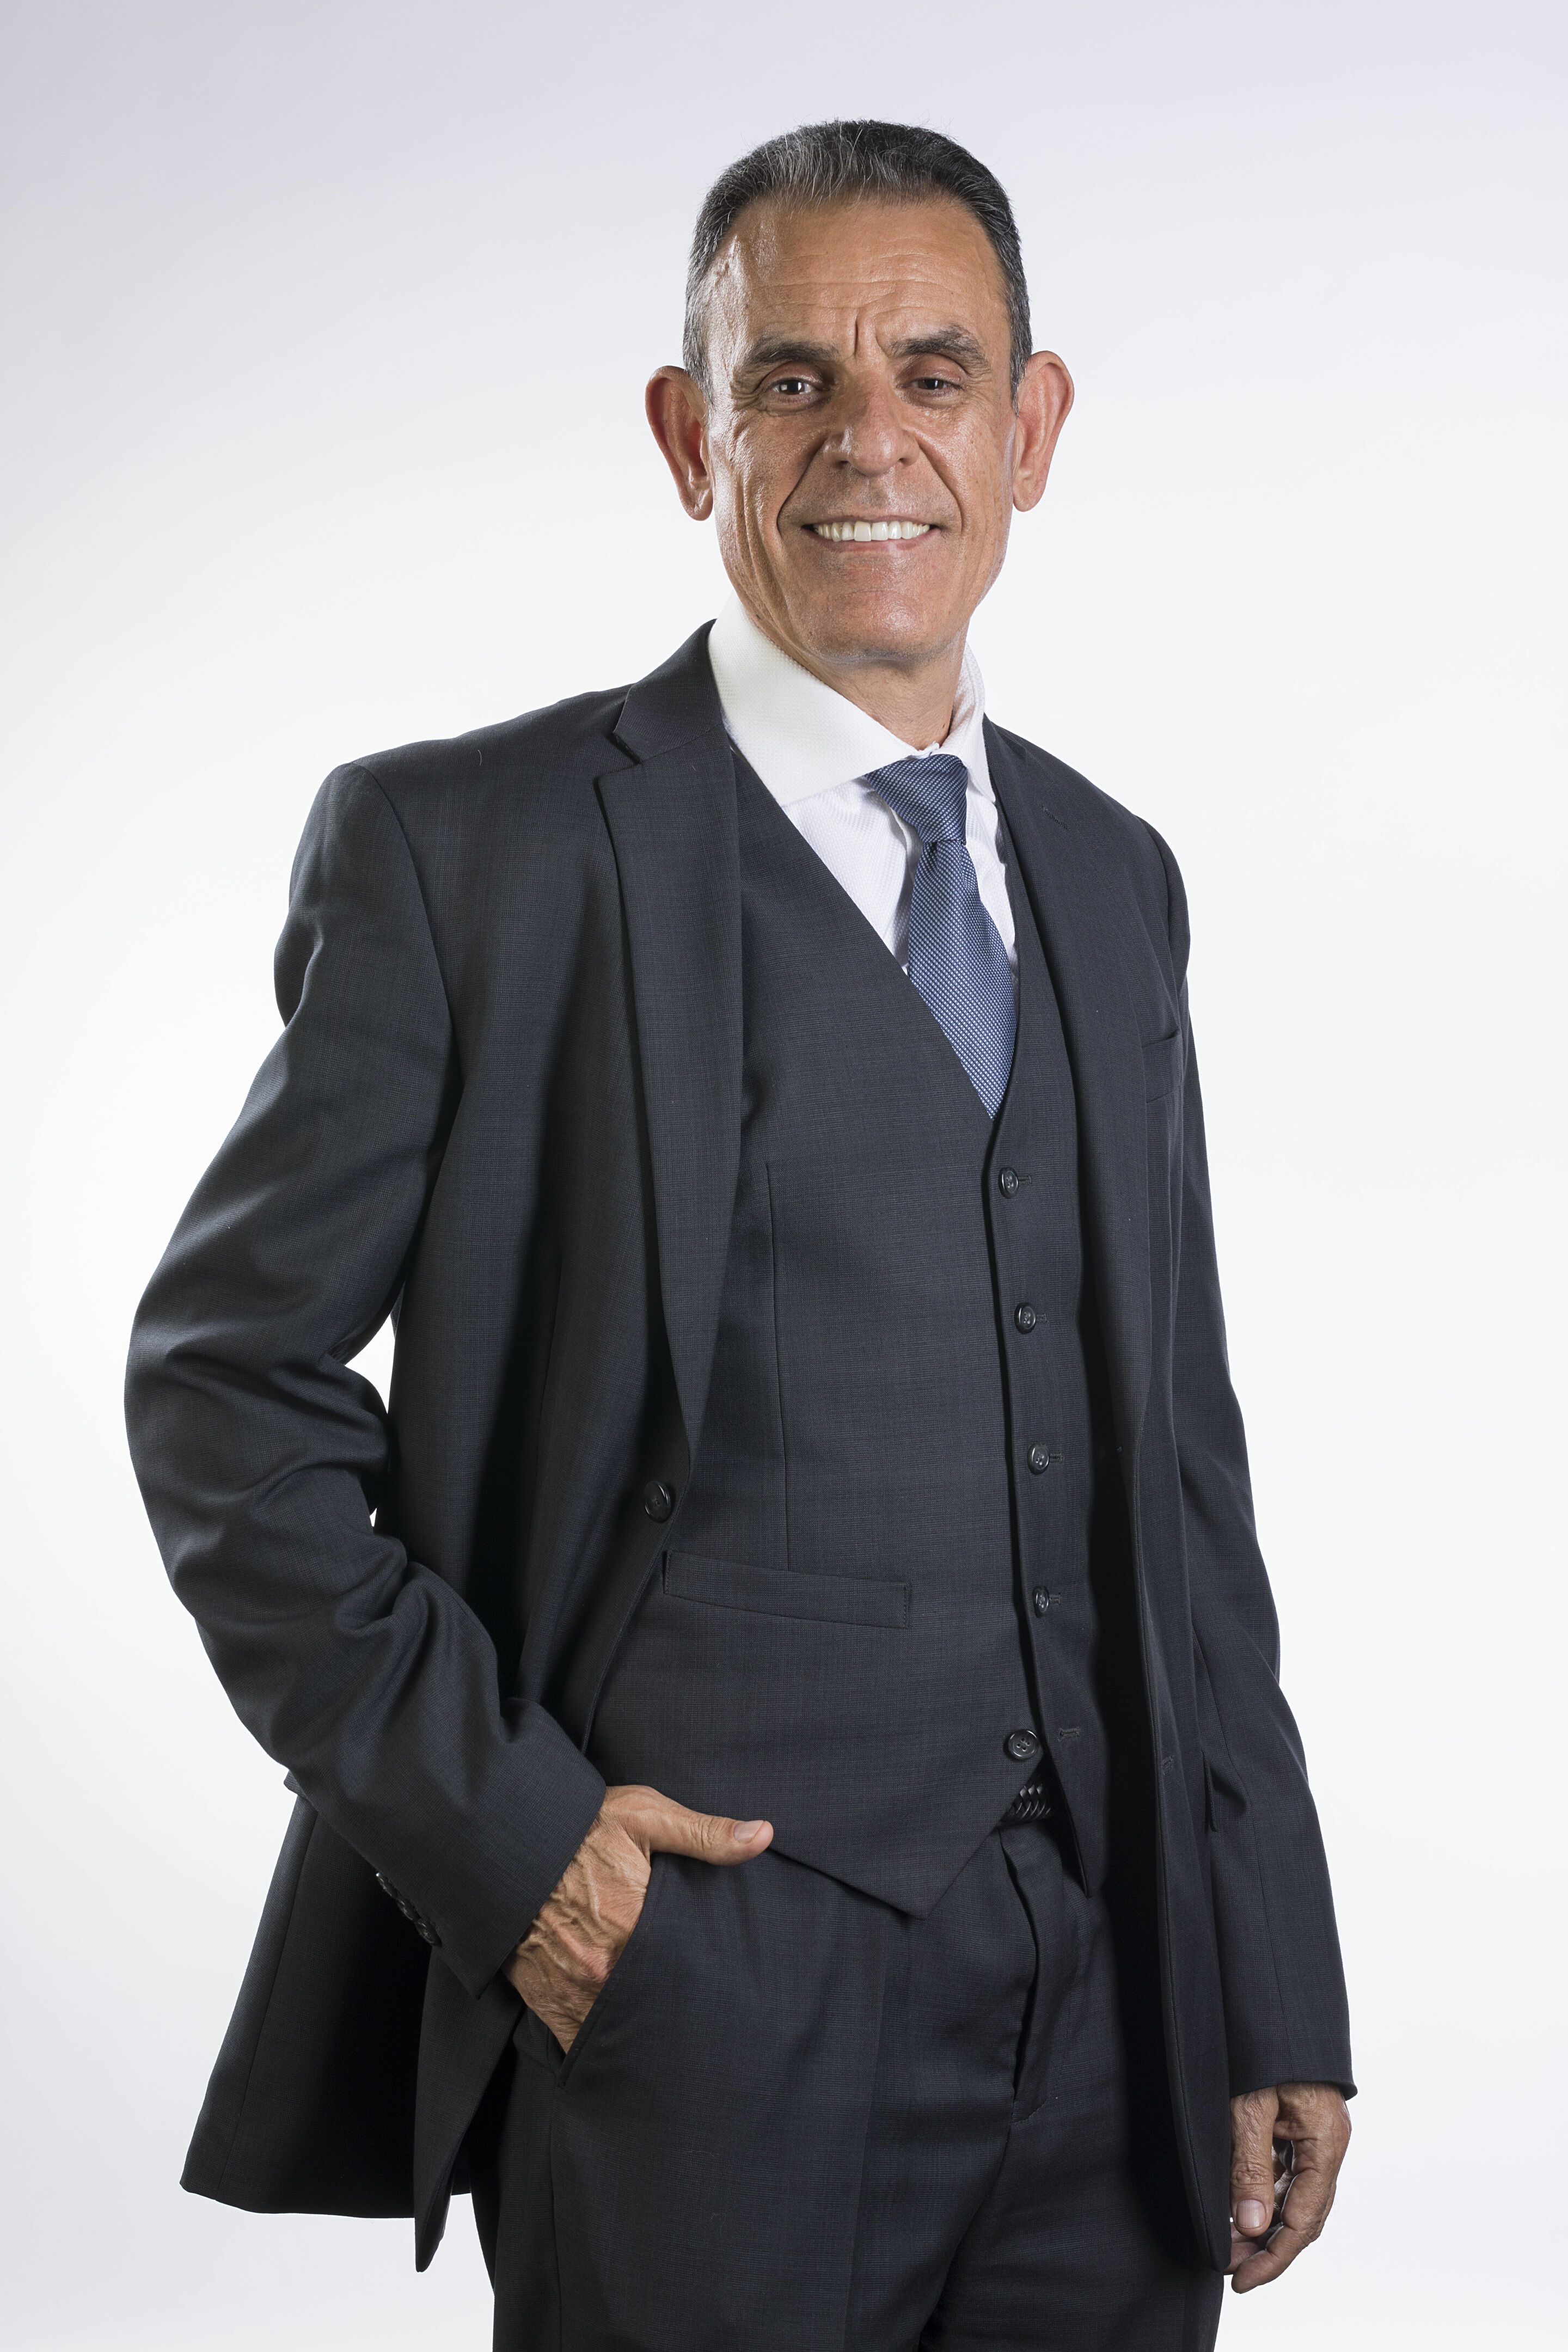 Jacobo Issa appointed new Vice President of Human Resources and Organization at Audi México